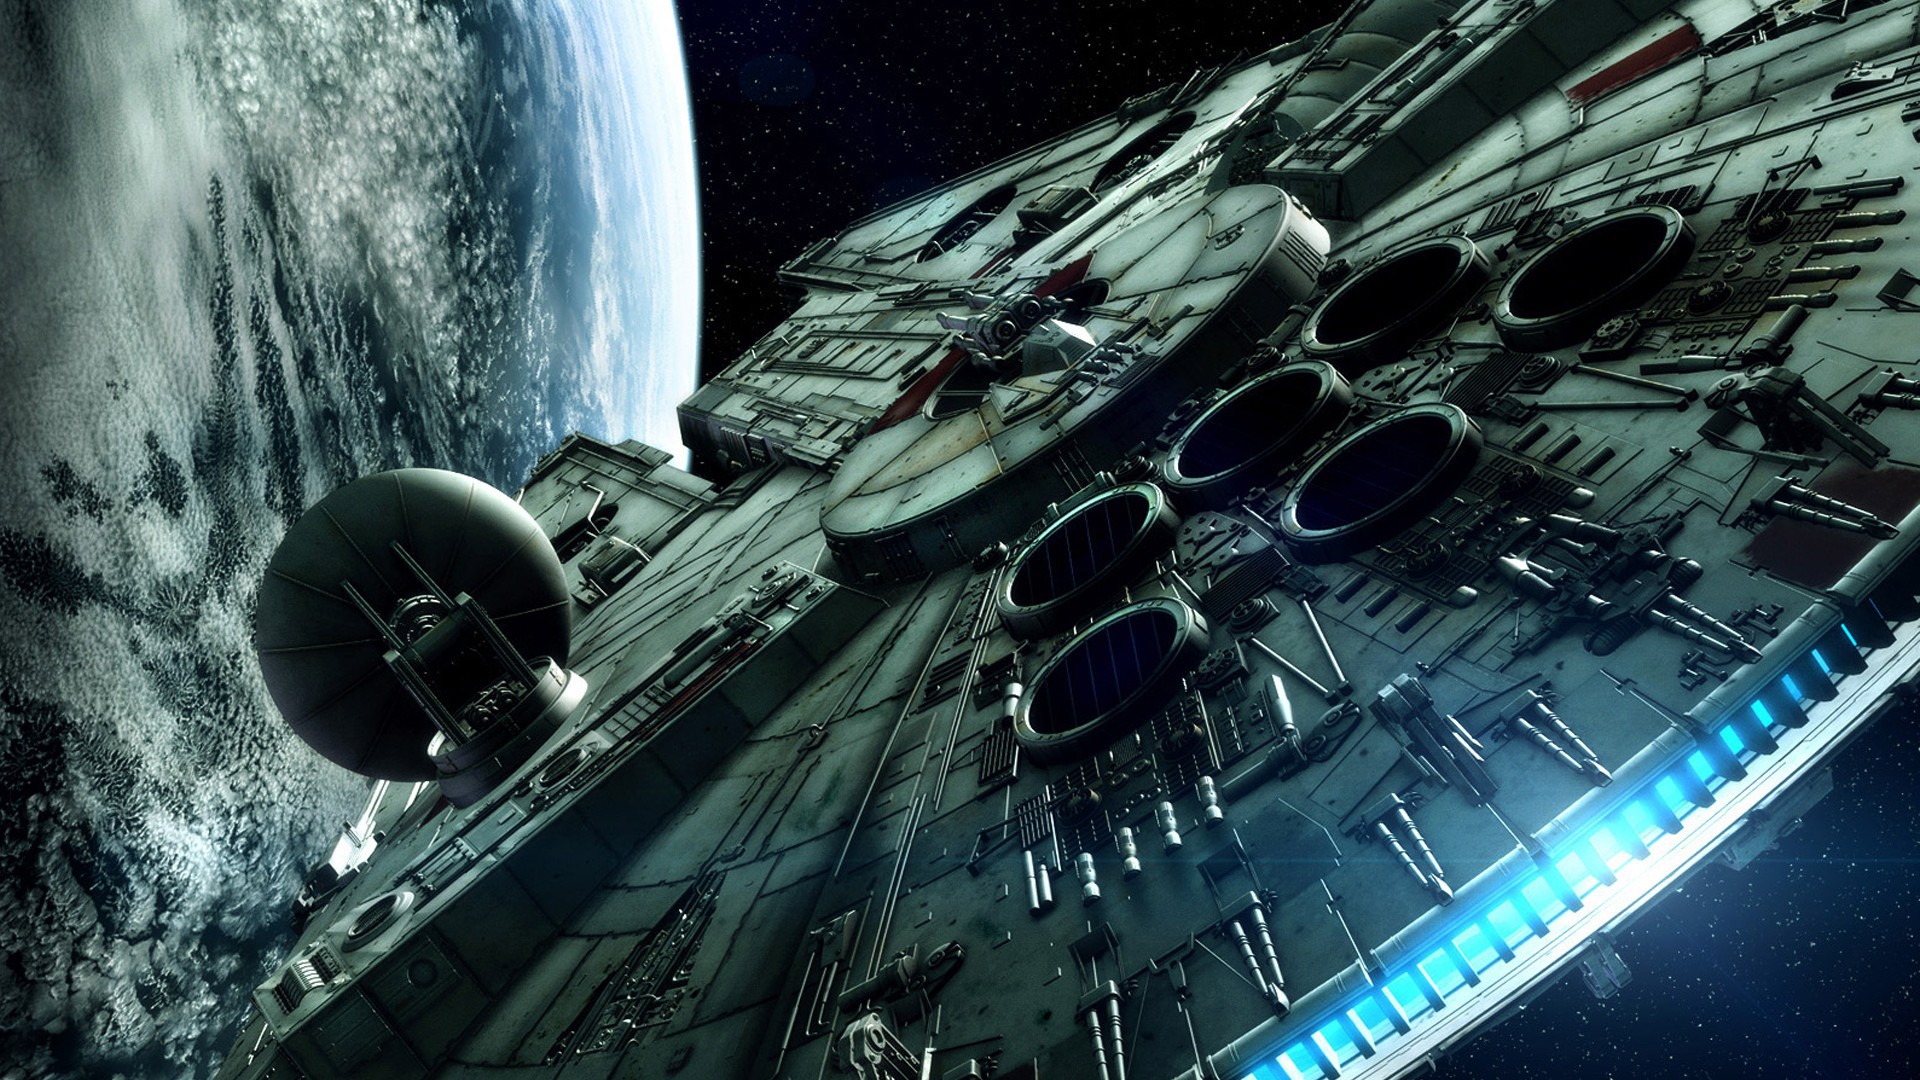 Ship From Star Wars Millenium Falcon Wallpaper And Image